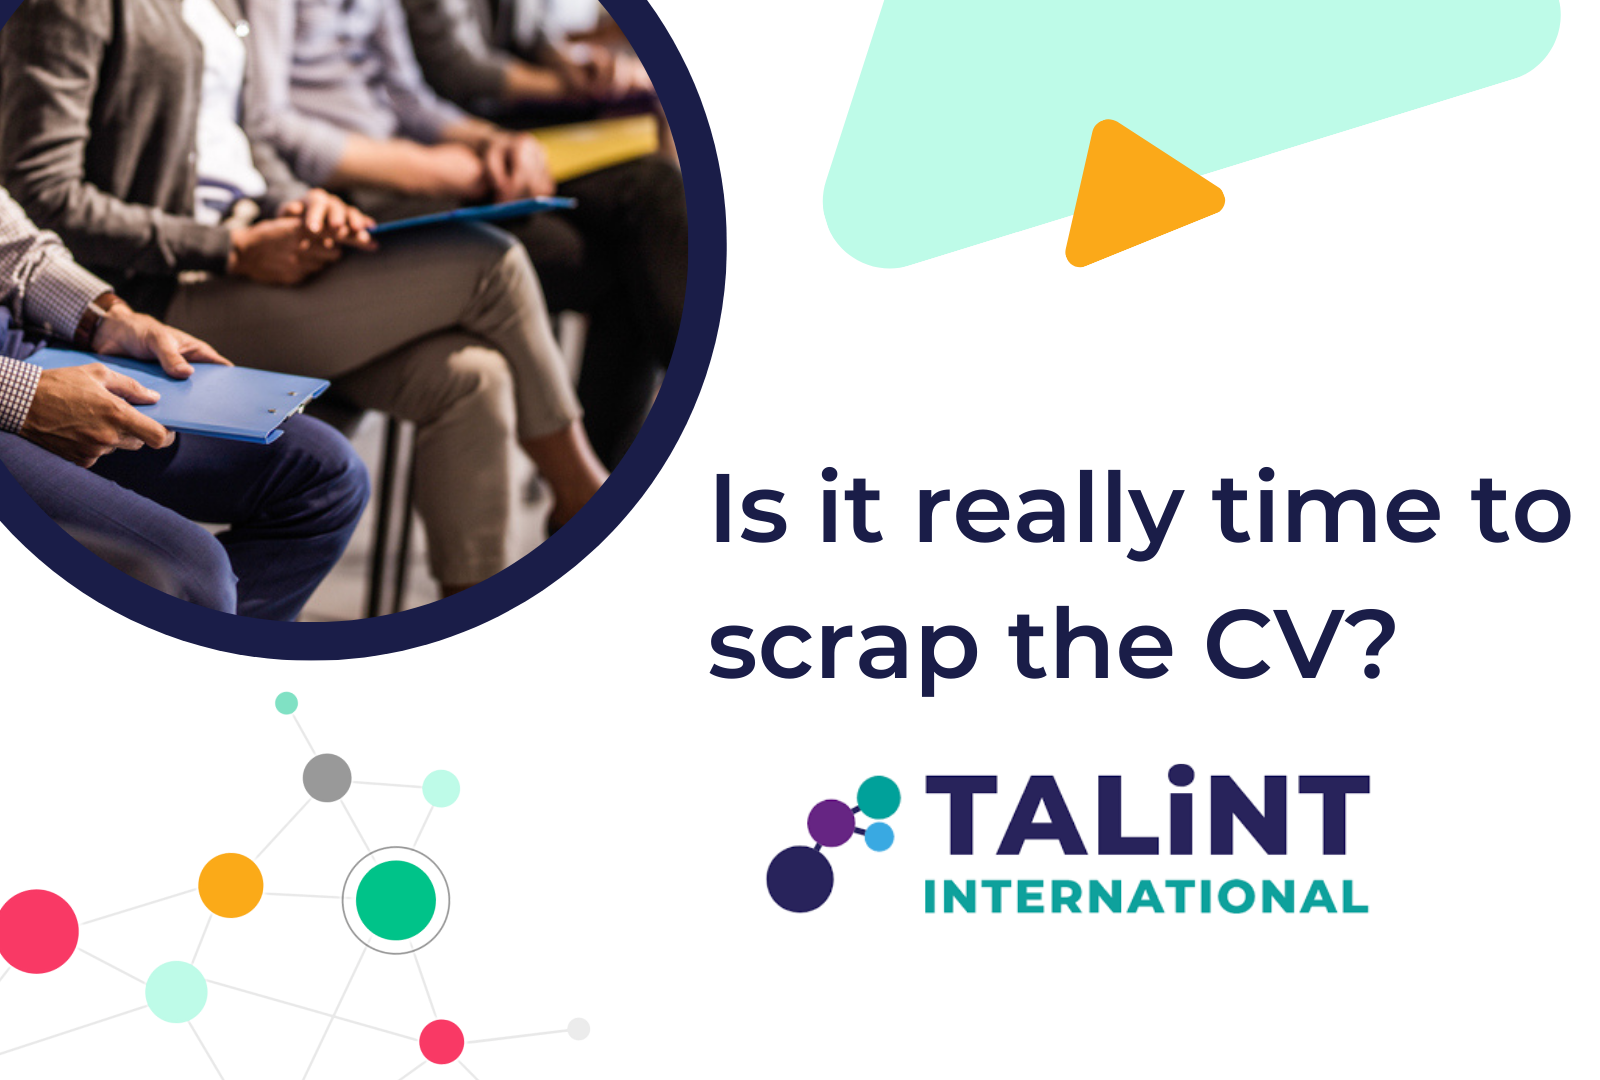 TALiNT: Is it really time to scrap the CV?